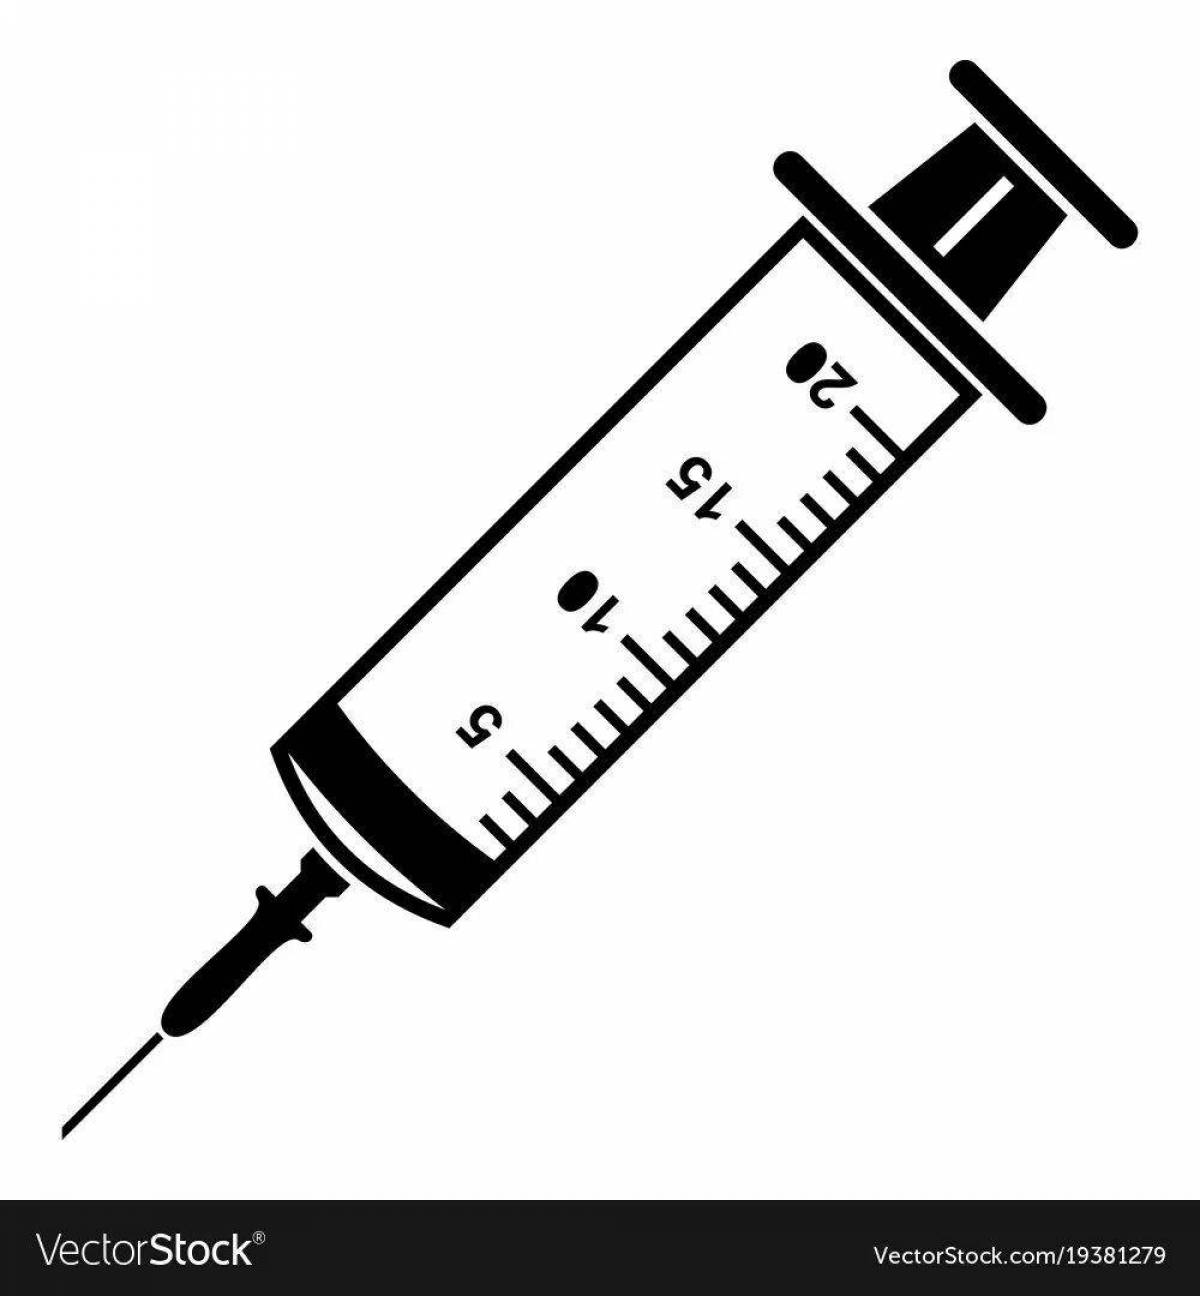 Coloring page charming syringe with a needle